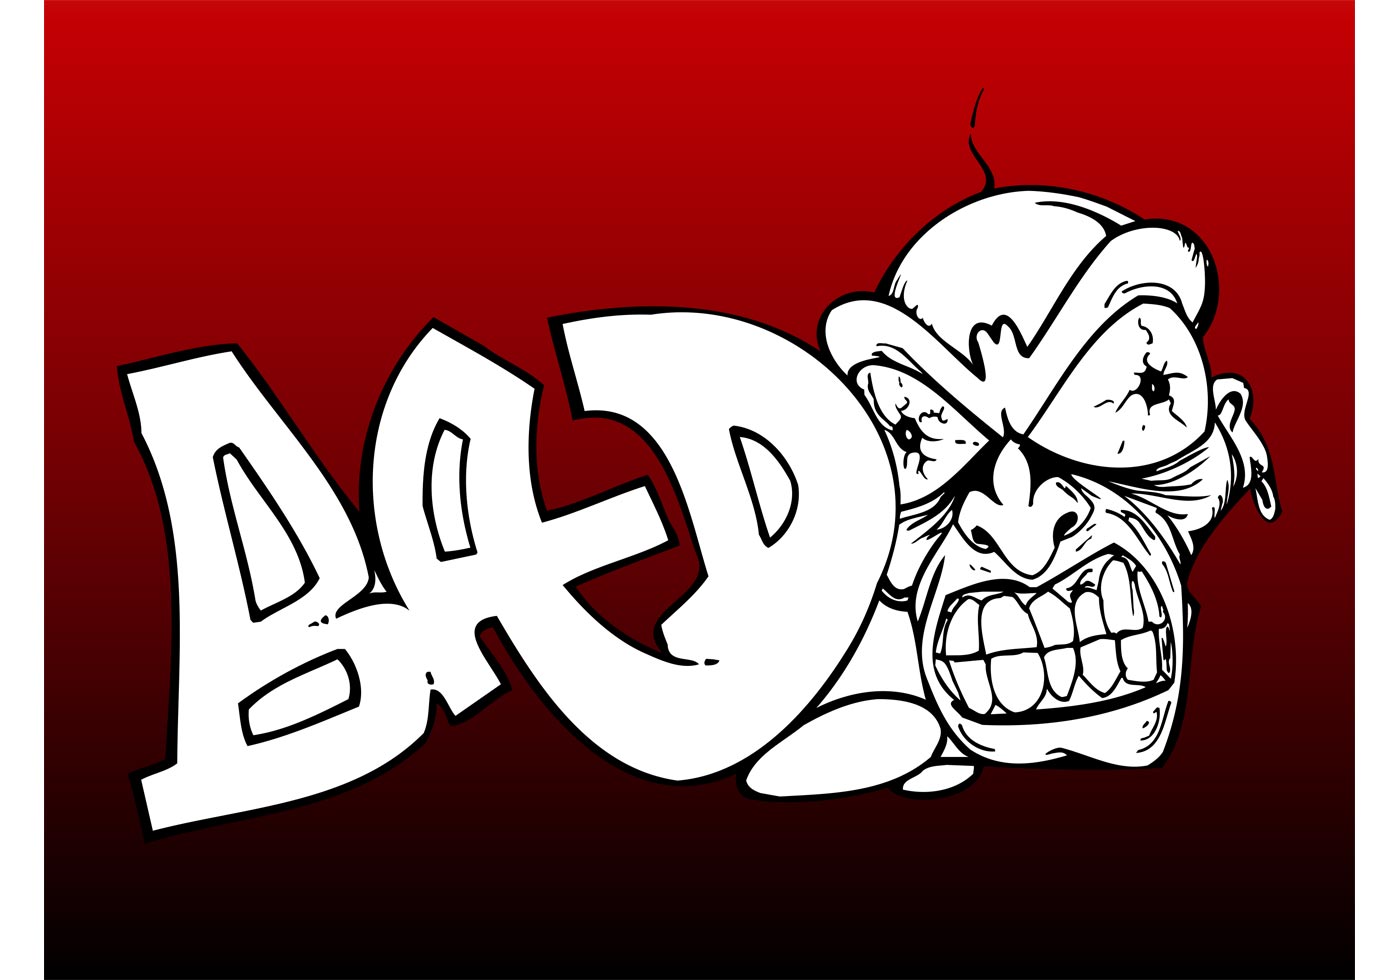 Download Bad Person Graffiti - Download Free Vector Art, Stock Graphics & Images